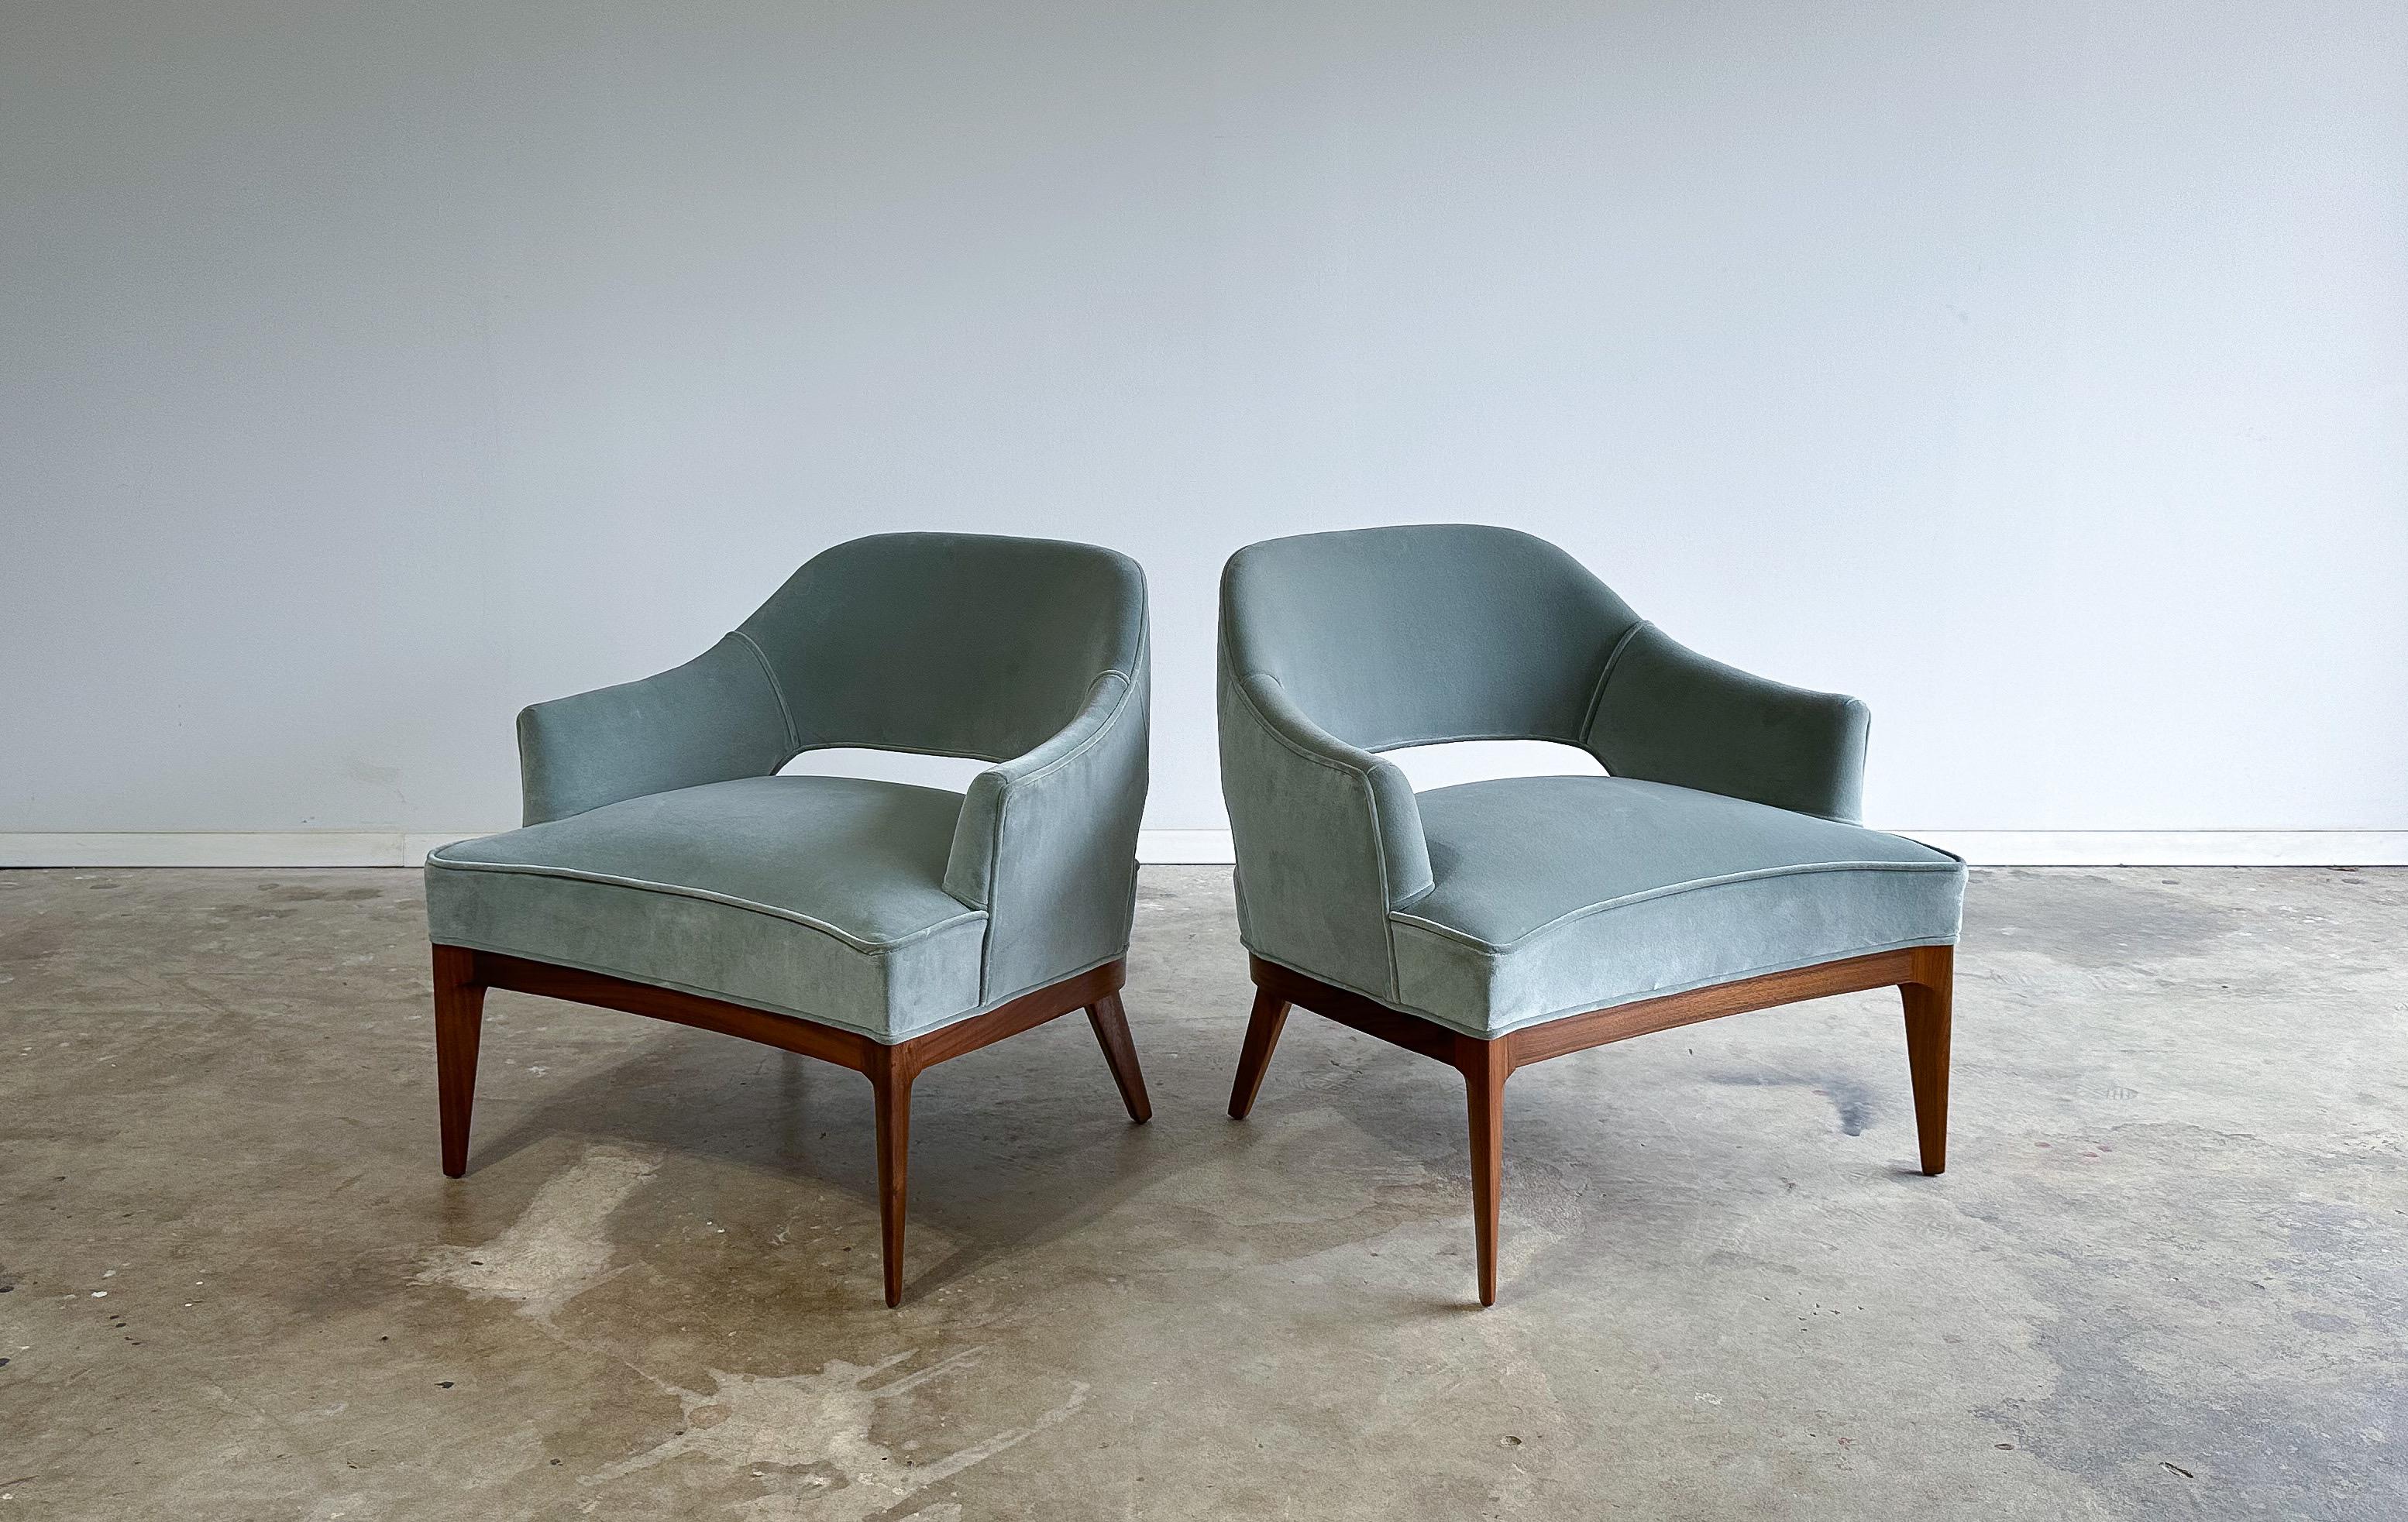 Pair of Lounge Chairs Attributed to Harvey Probber, Erwin Lambeth, 1960s For Sale 1